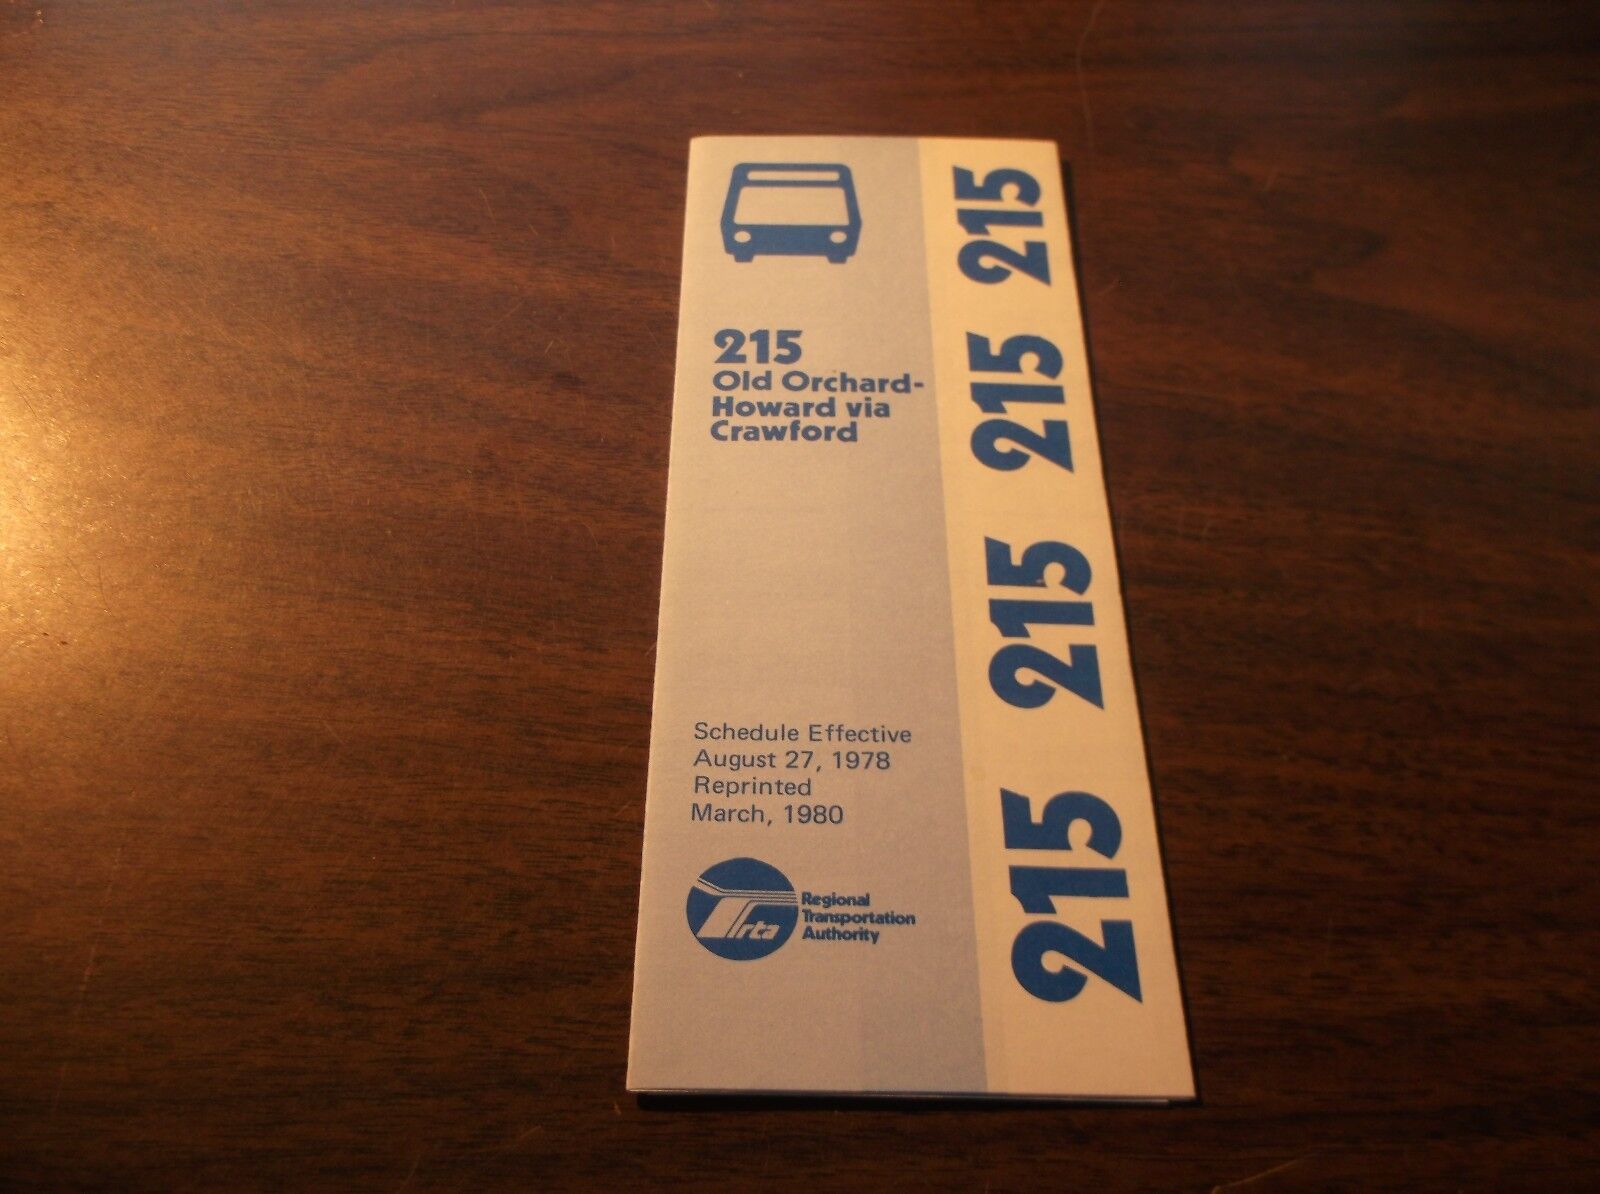 MARCH 1980 CHICAGO RTA ROUTE 215 OLD ORCHARD/HOWARD SERVICE BUS SCHEDULE